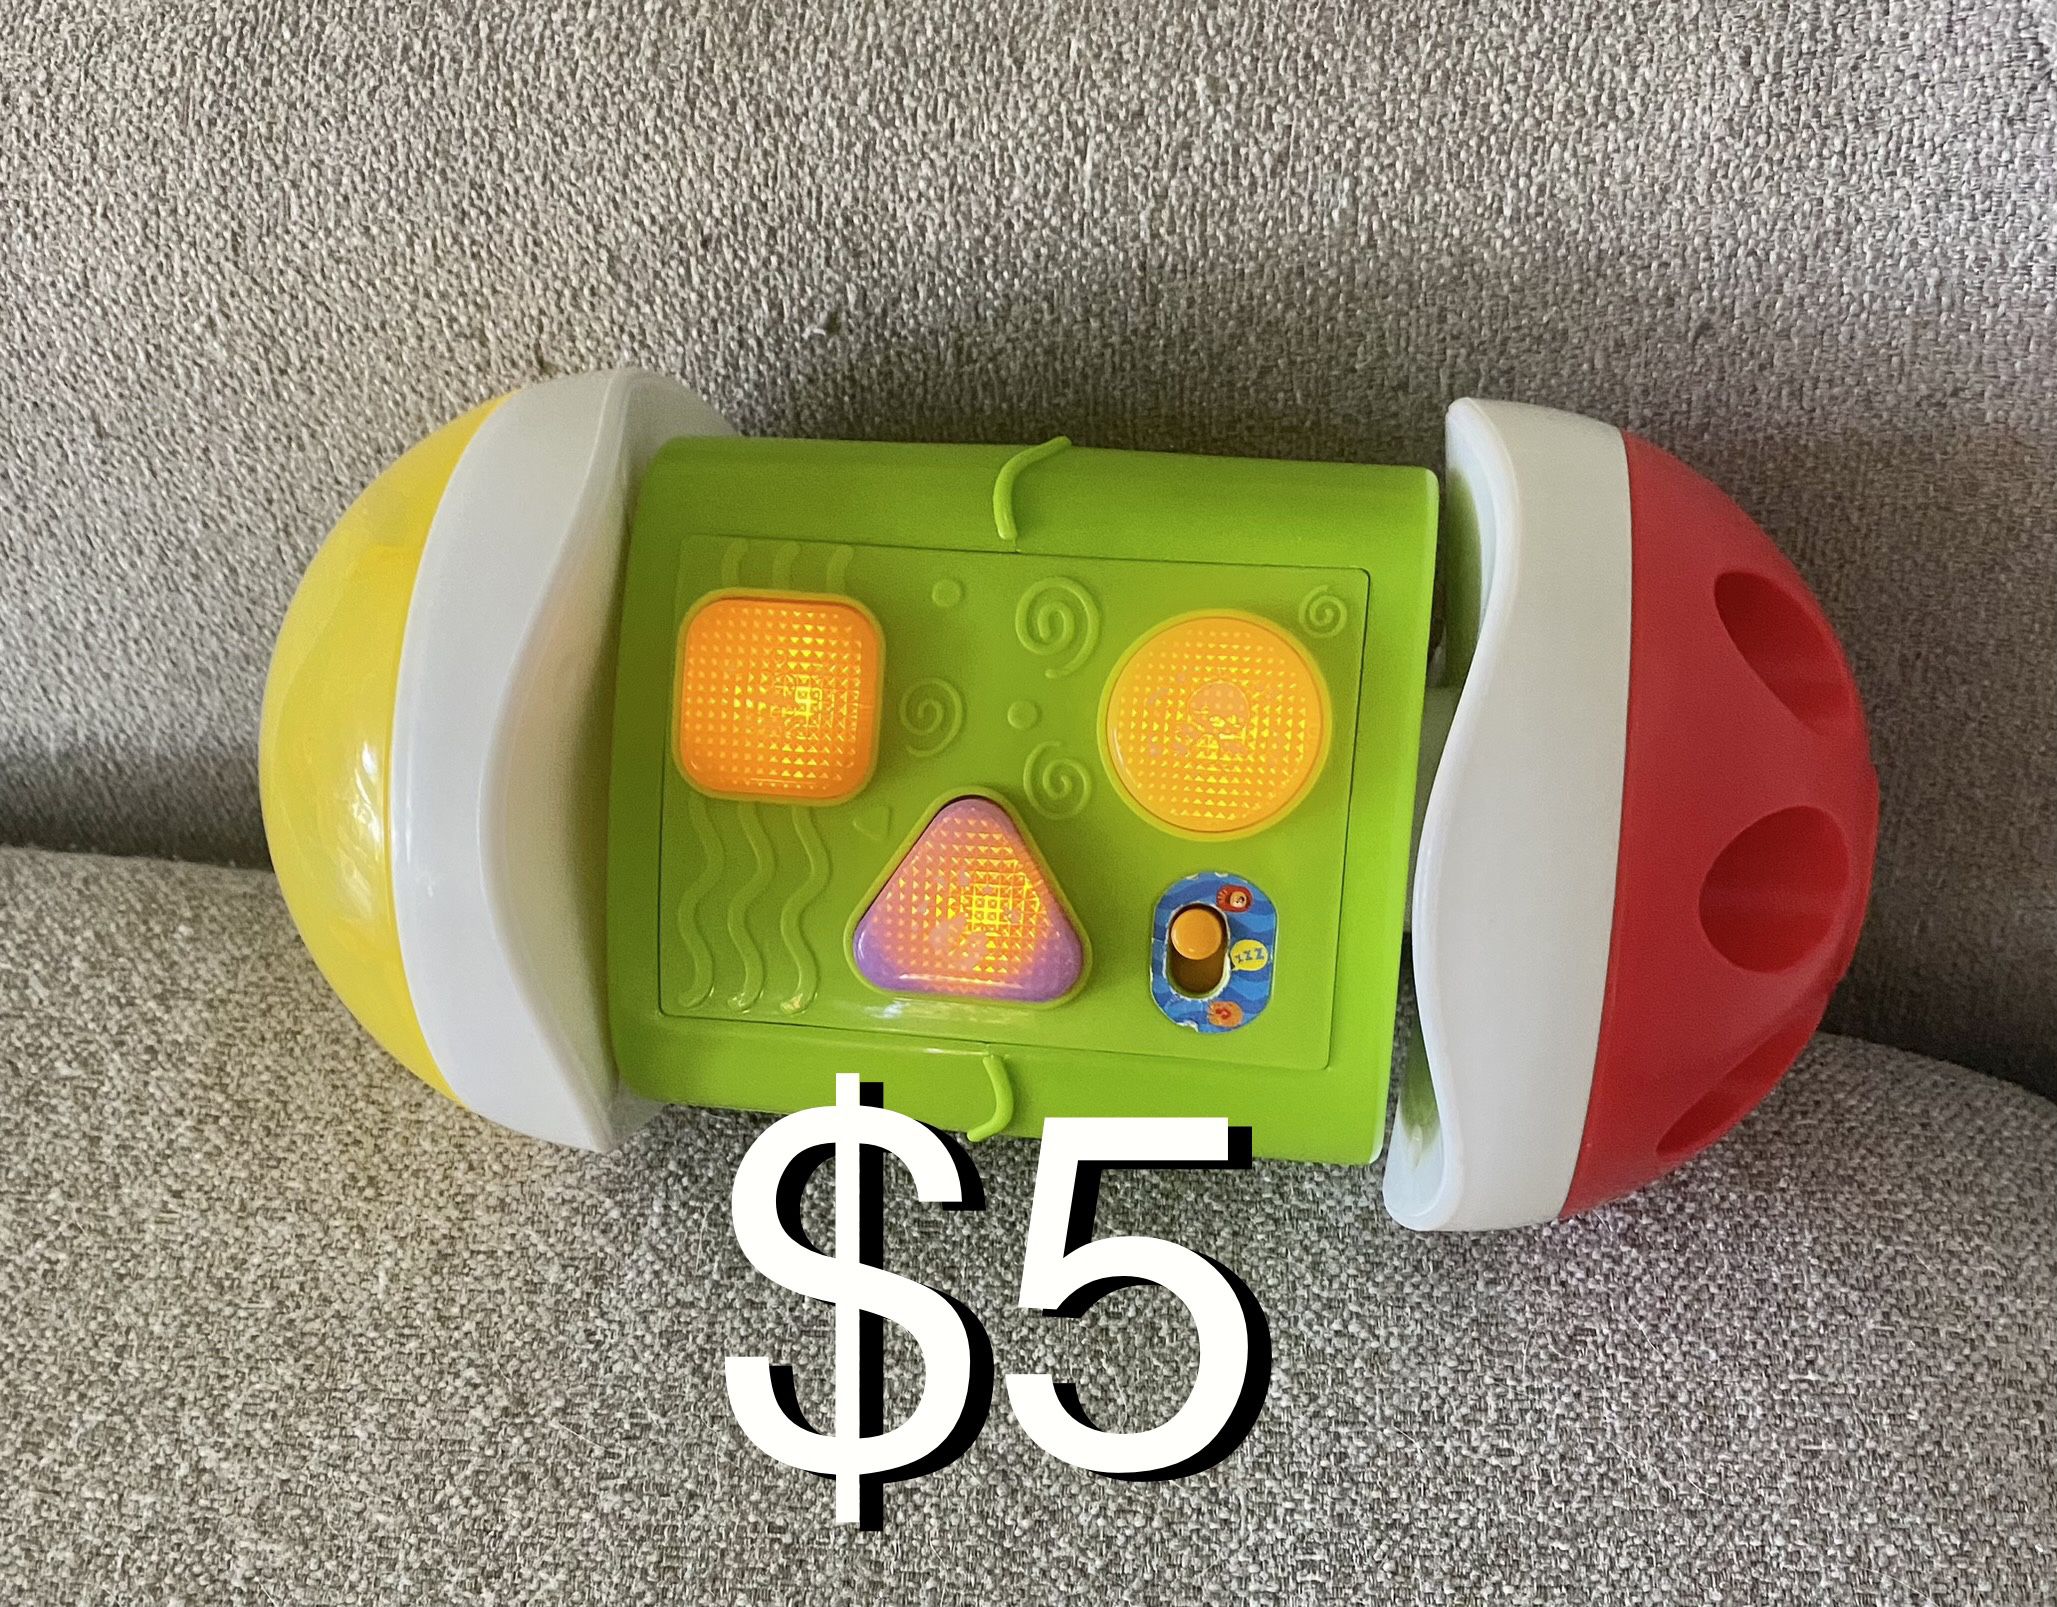 $5 KiddoLab 3 in 1 Roll & Learn Activity Center Baby Toy push and play, 👀 my listings for more toys